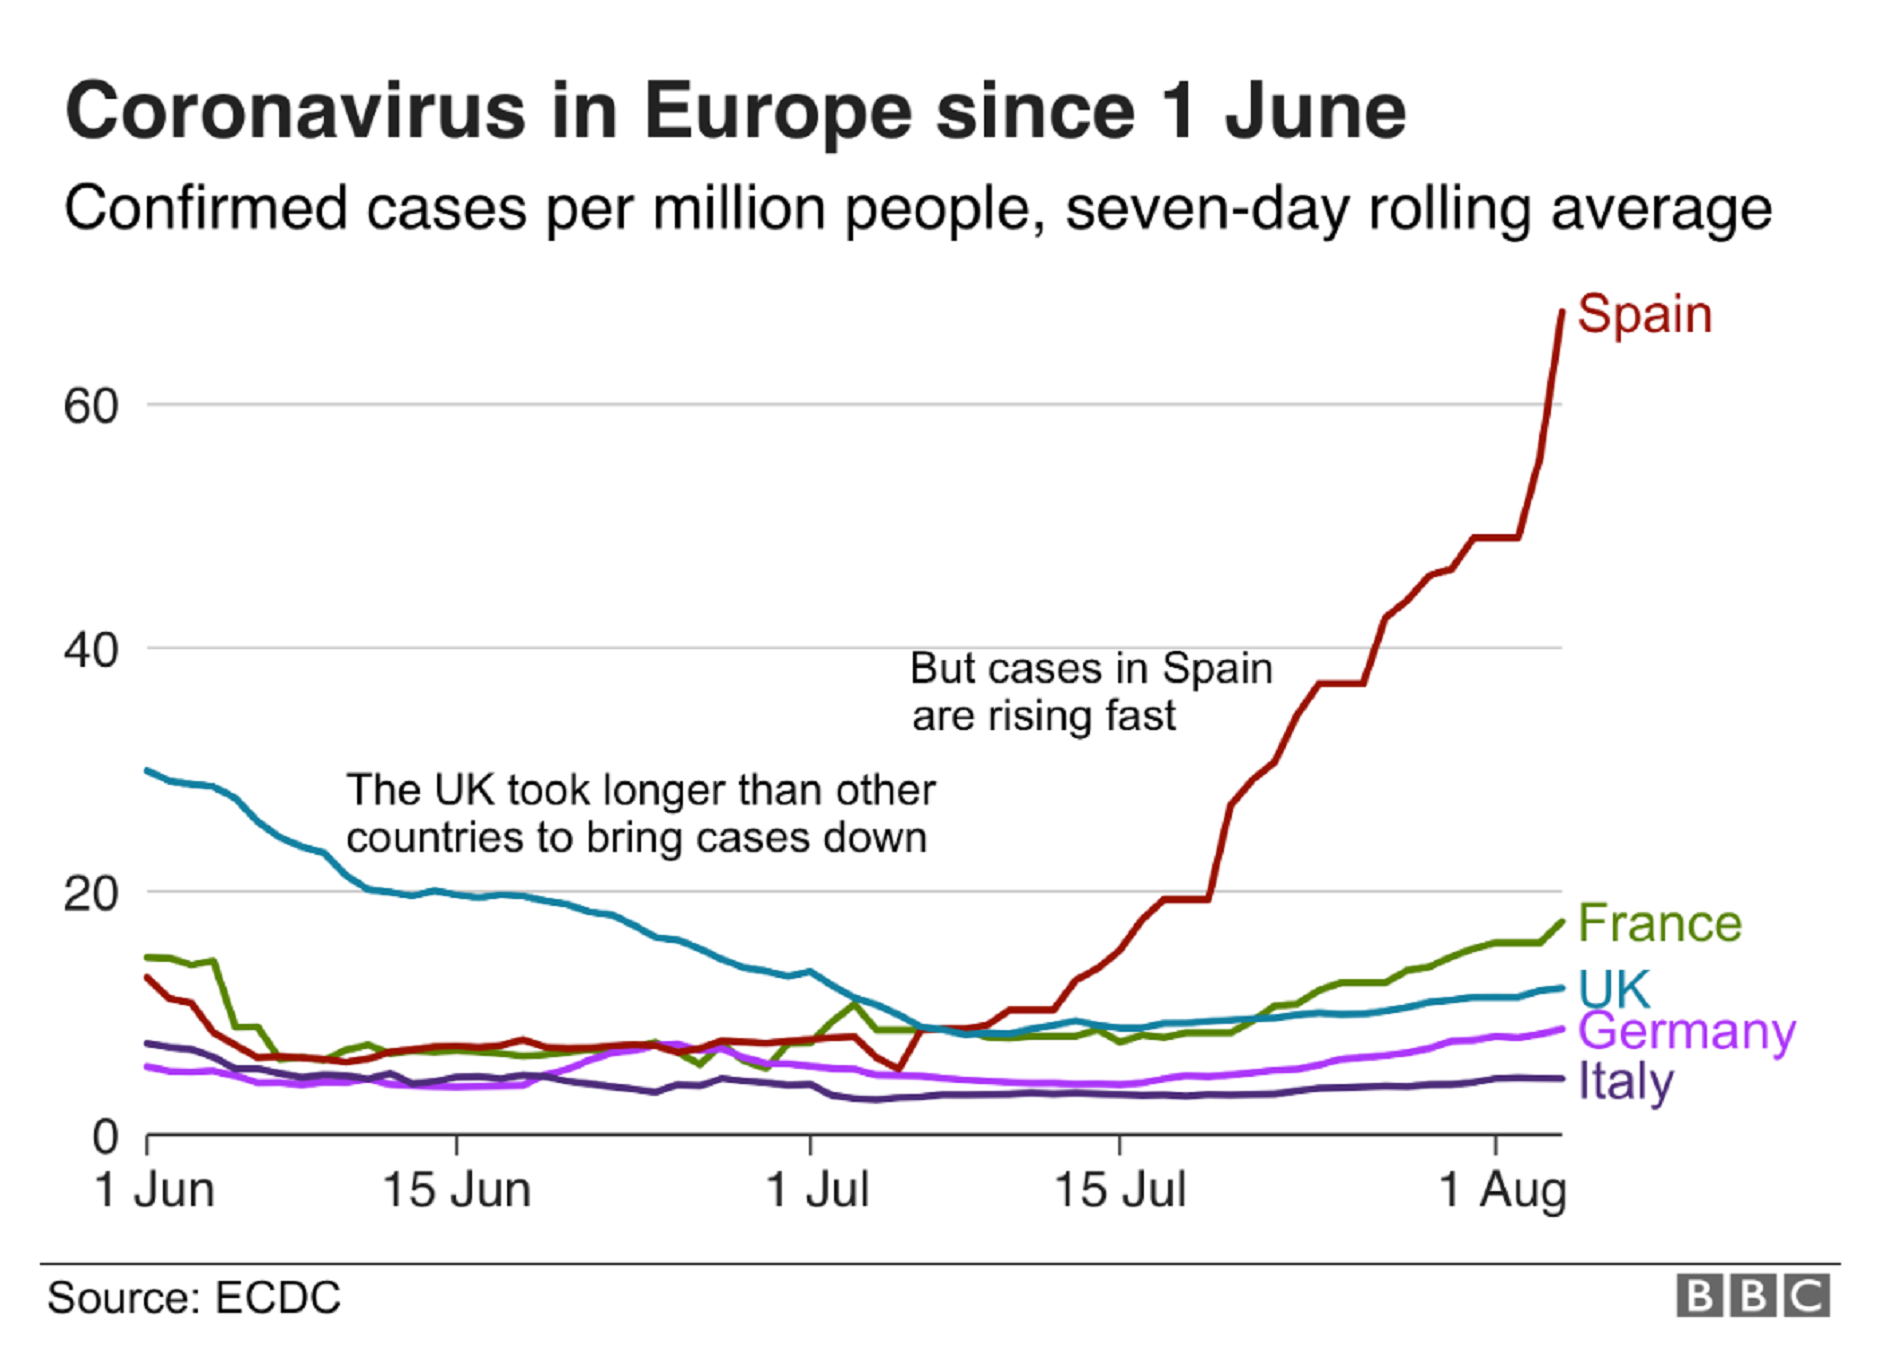 BBC Covid graph shows Spain has become the sick man of Europe again